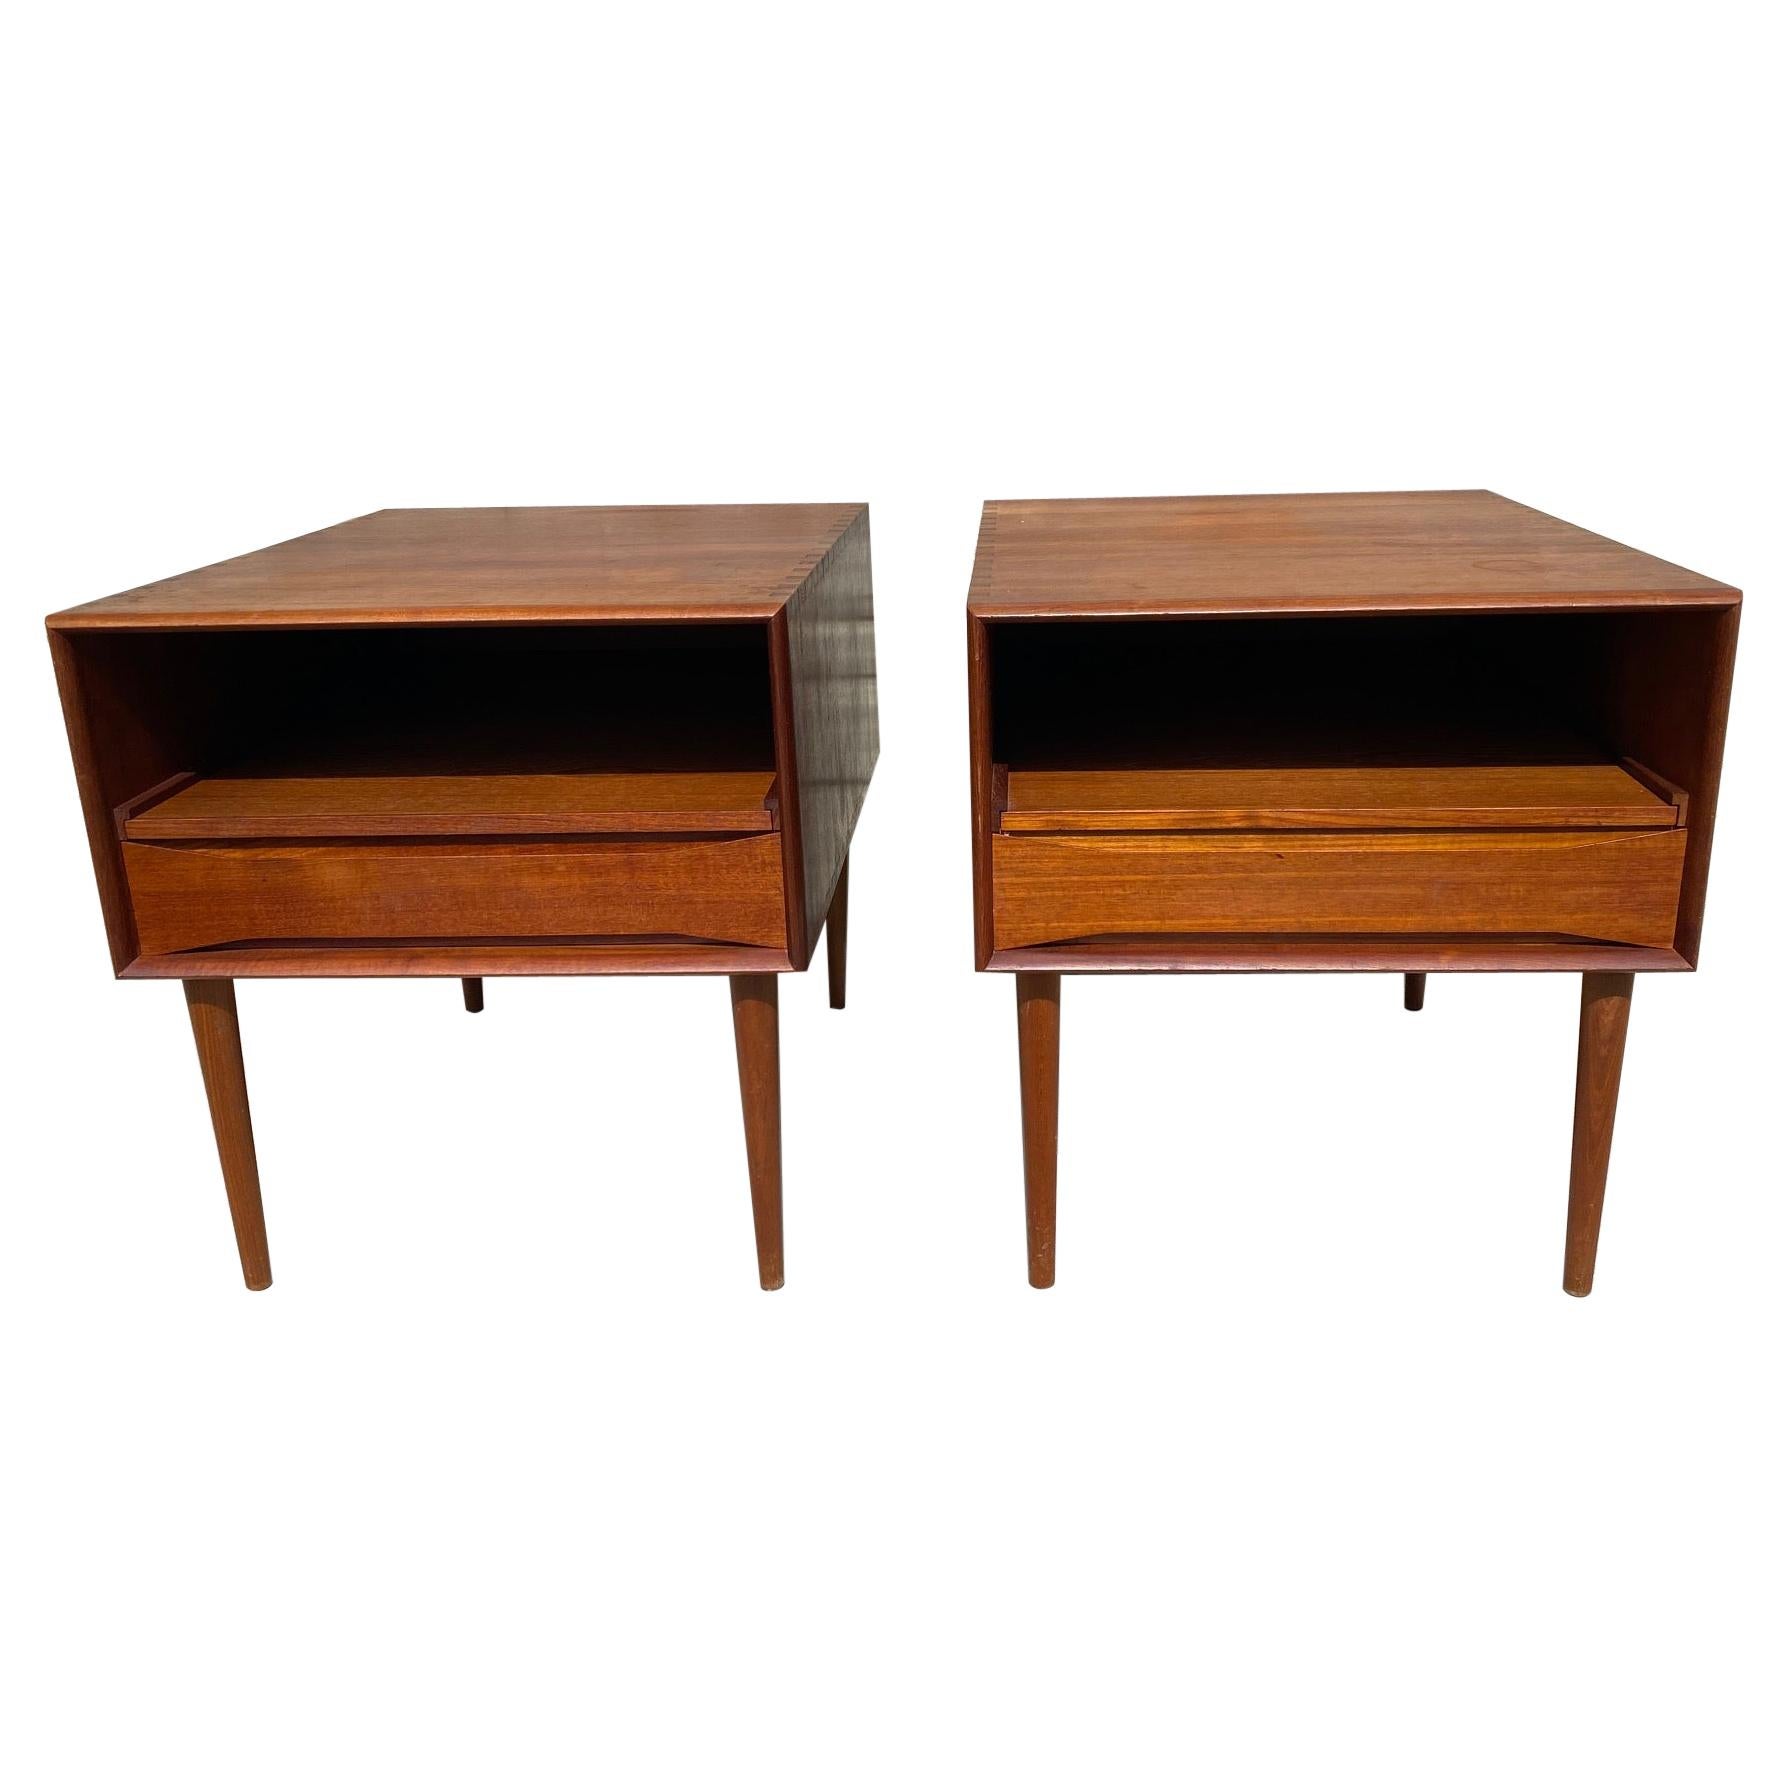 Pair of Rare Solid Teak Side Tables by Johannes Aasbjerg